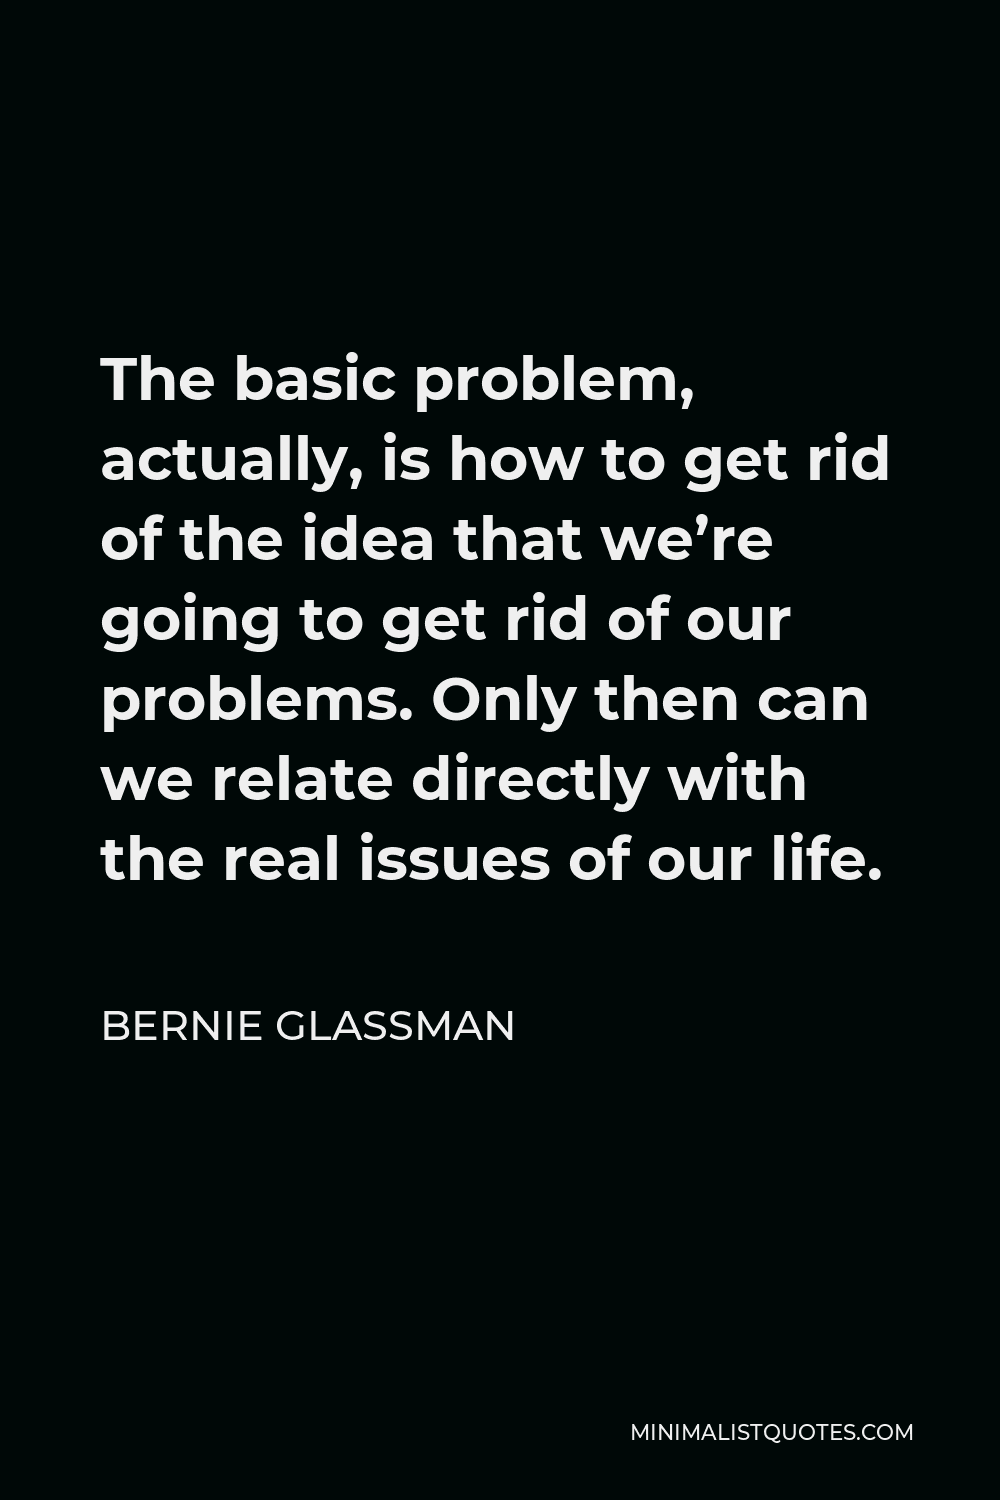 Bernie Glassman Quote - The basic problem, actually, is how to get rid of the idea that we’re going to get rid of our problems. Only then can we relate directly with the real issues of our life.